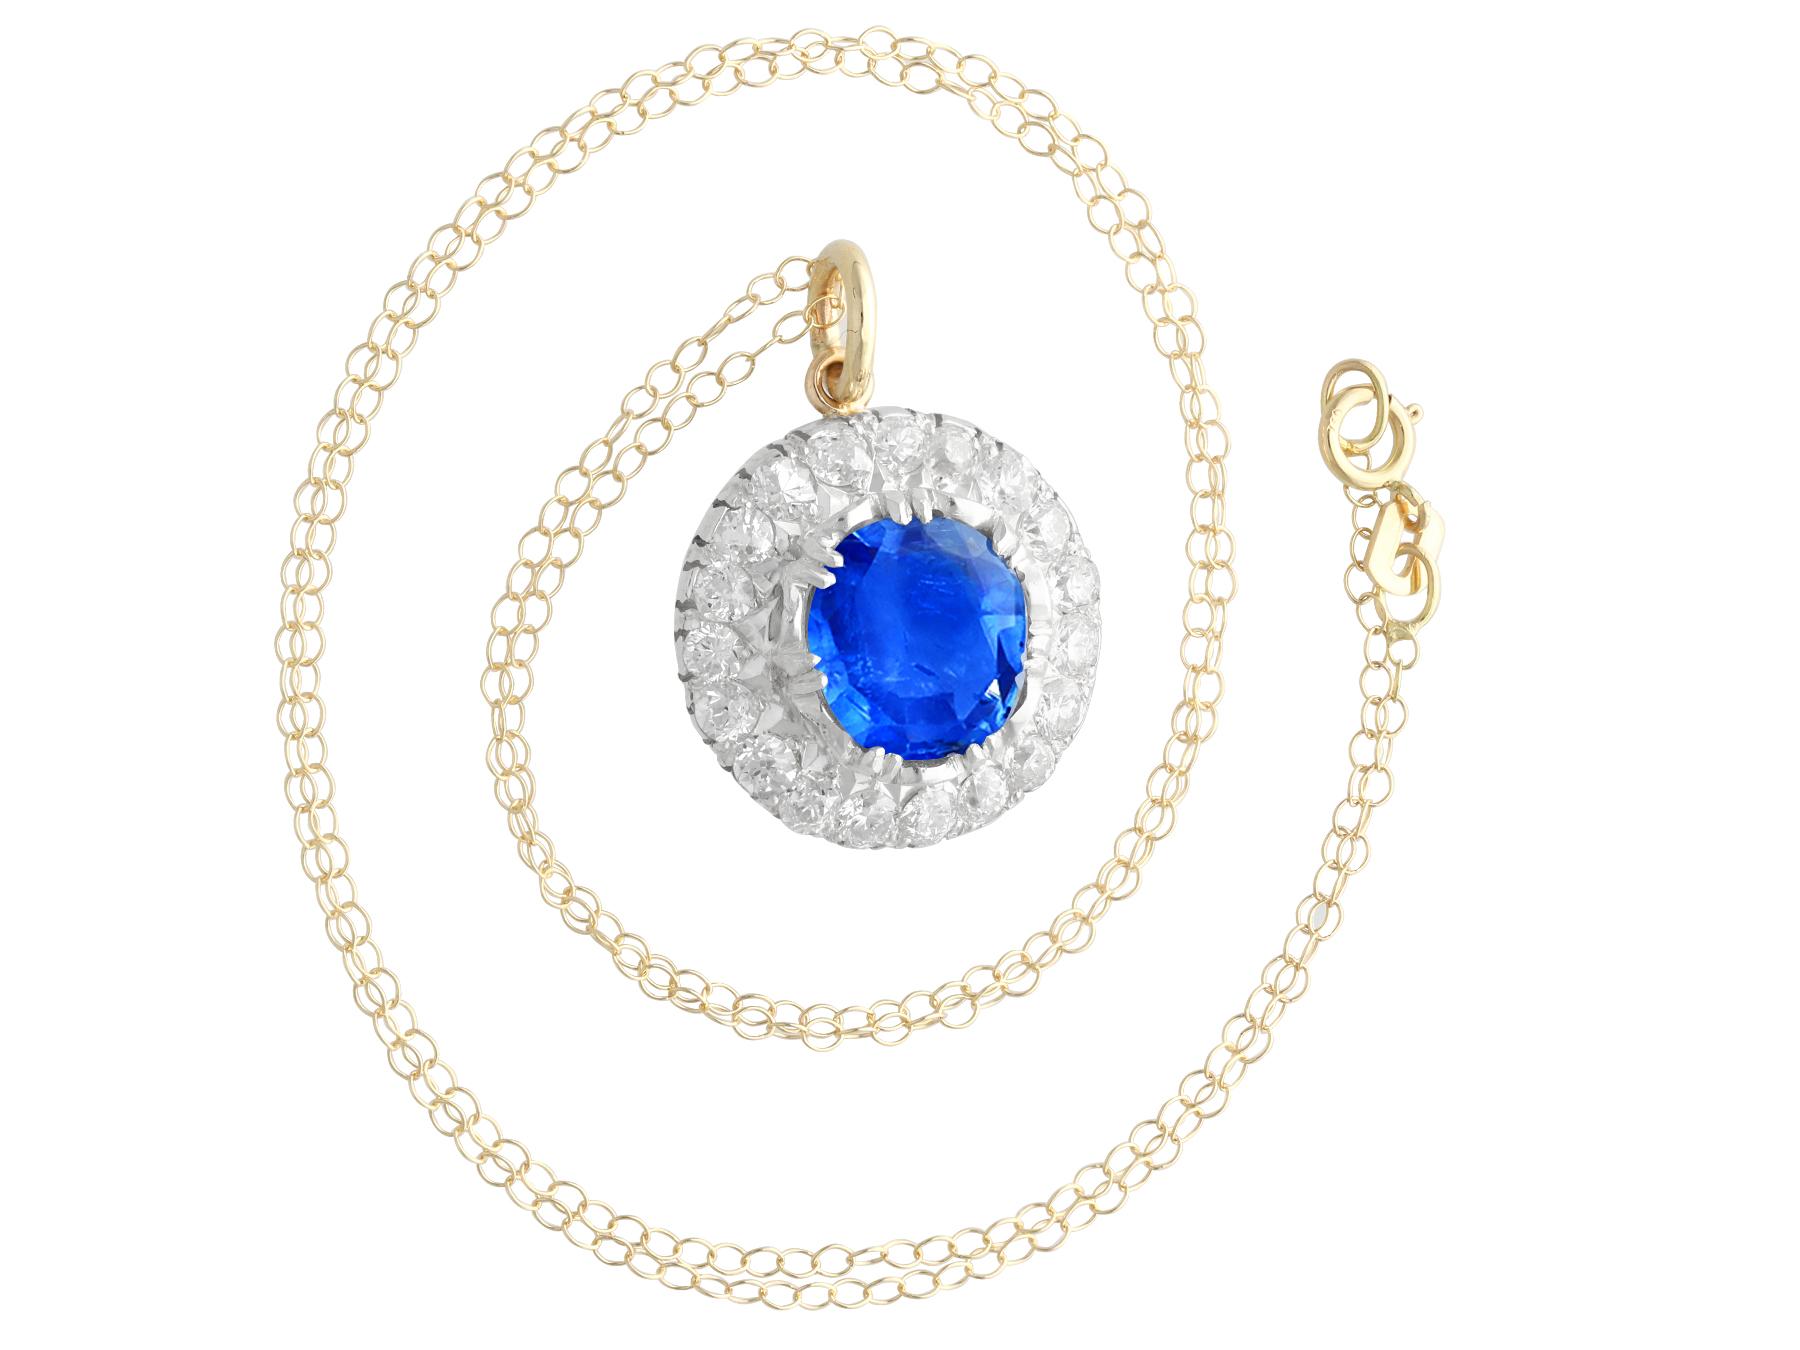 Oval Cut Antique 3.58ct Ceylon Sapphire and 2.02ct Diamond 15k Yellow Gold Pendant For Sale